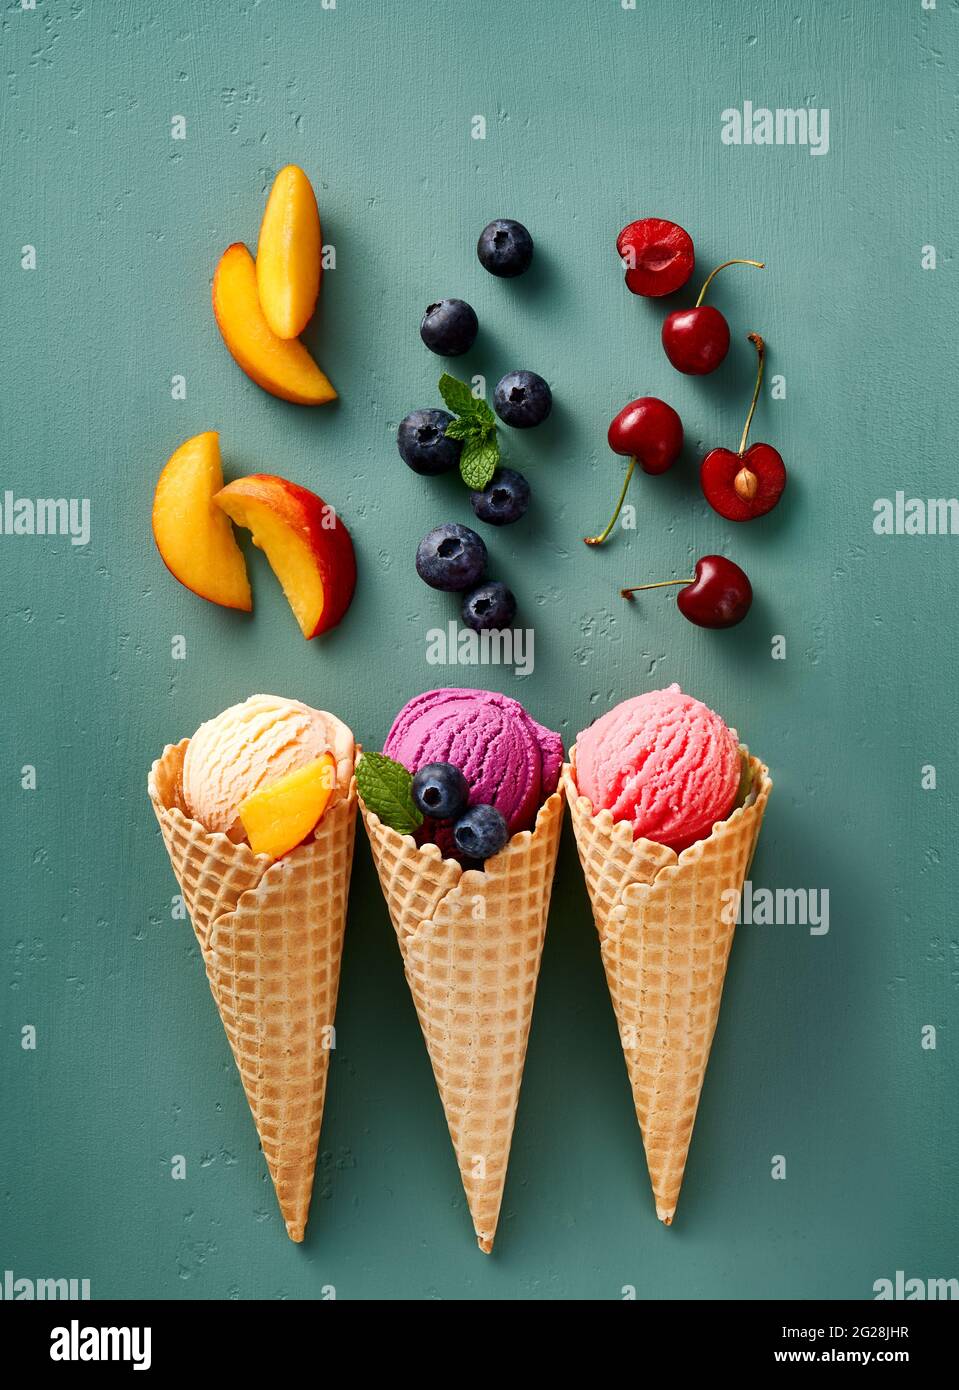 Assorted of ice cream in cones on blue background. Colorful set of ice cream of different flavours. Ice cream isolated with nuts, fruits and berries. Stock Photo